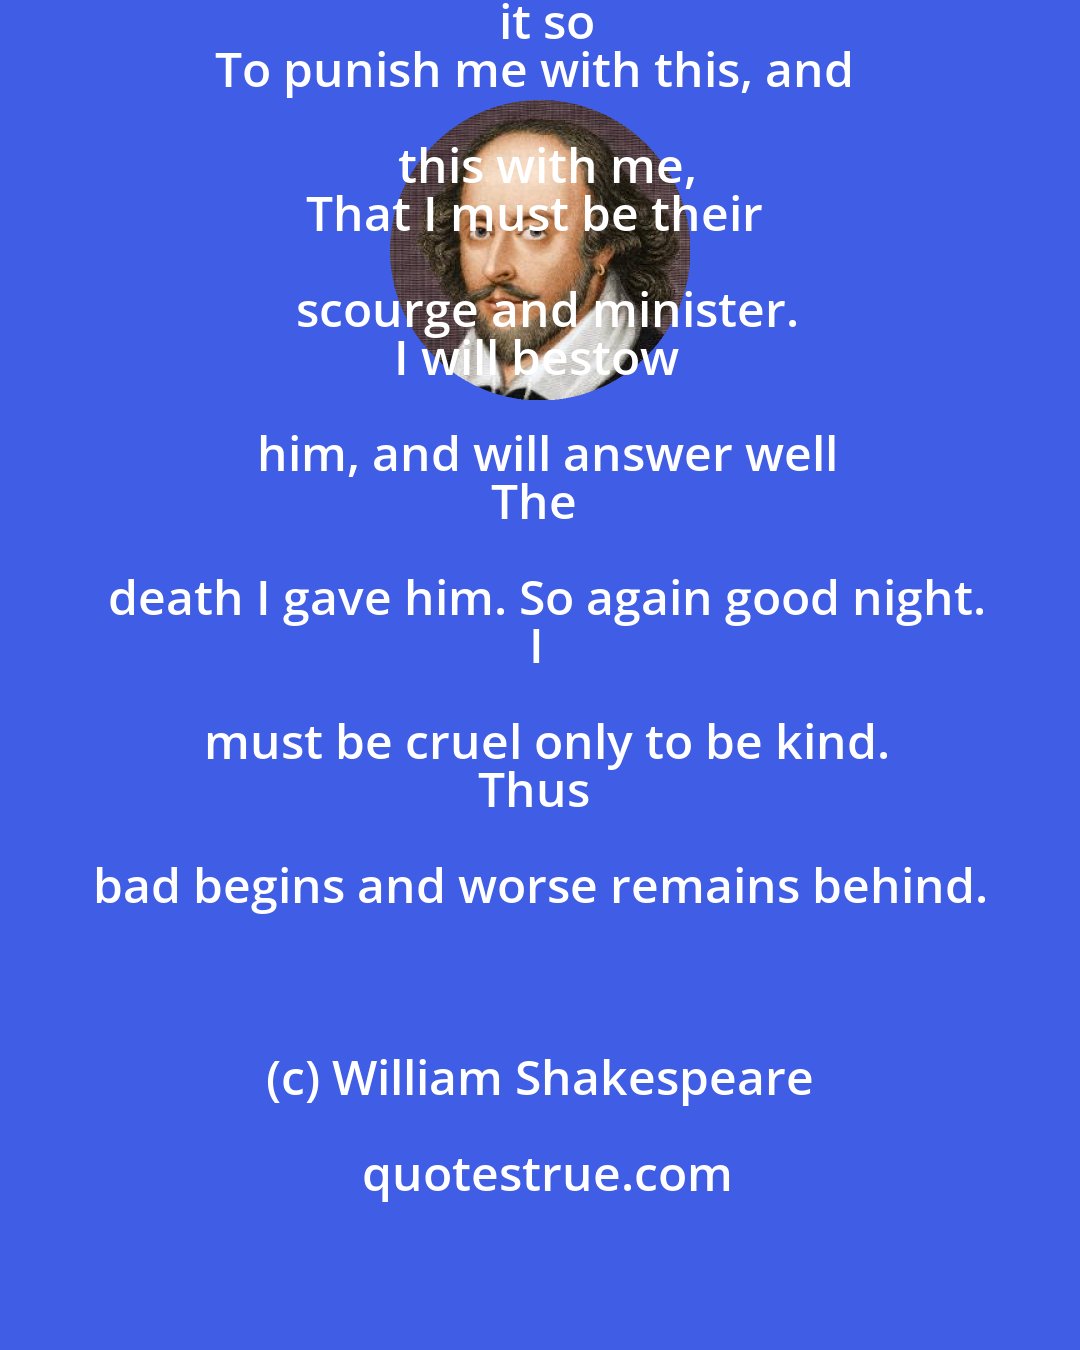 William Shakespeare: I do repent; but heaven hath pleas'd it so
To punish me with this, and this with me,
That I must be their scourge and minister.
I will bestow him, and will answer well
The death I gave him. So again good night.
I must be cruel only to be kind.
Thus bad begins and worse remains behind.